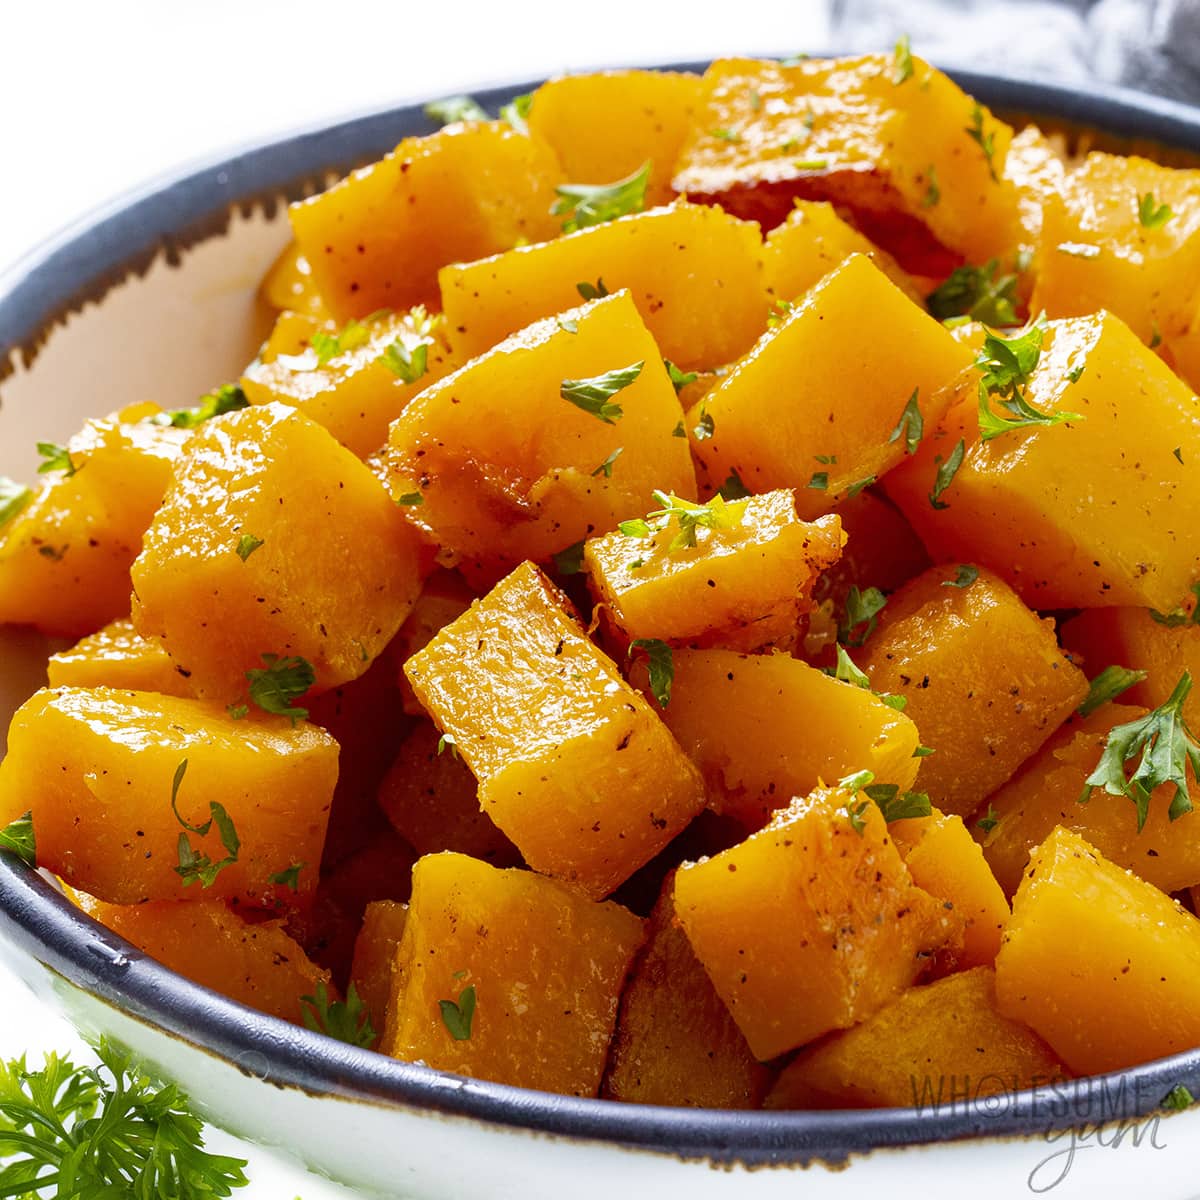 Roasted butternut squash piled into a bowl.